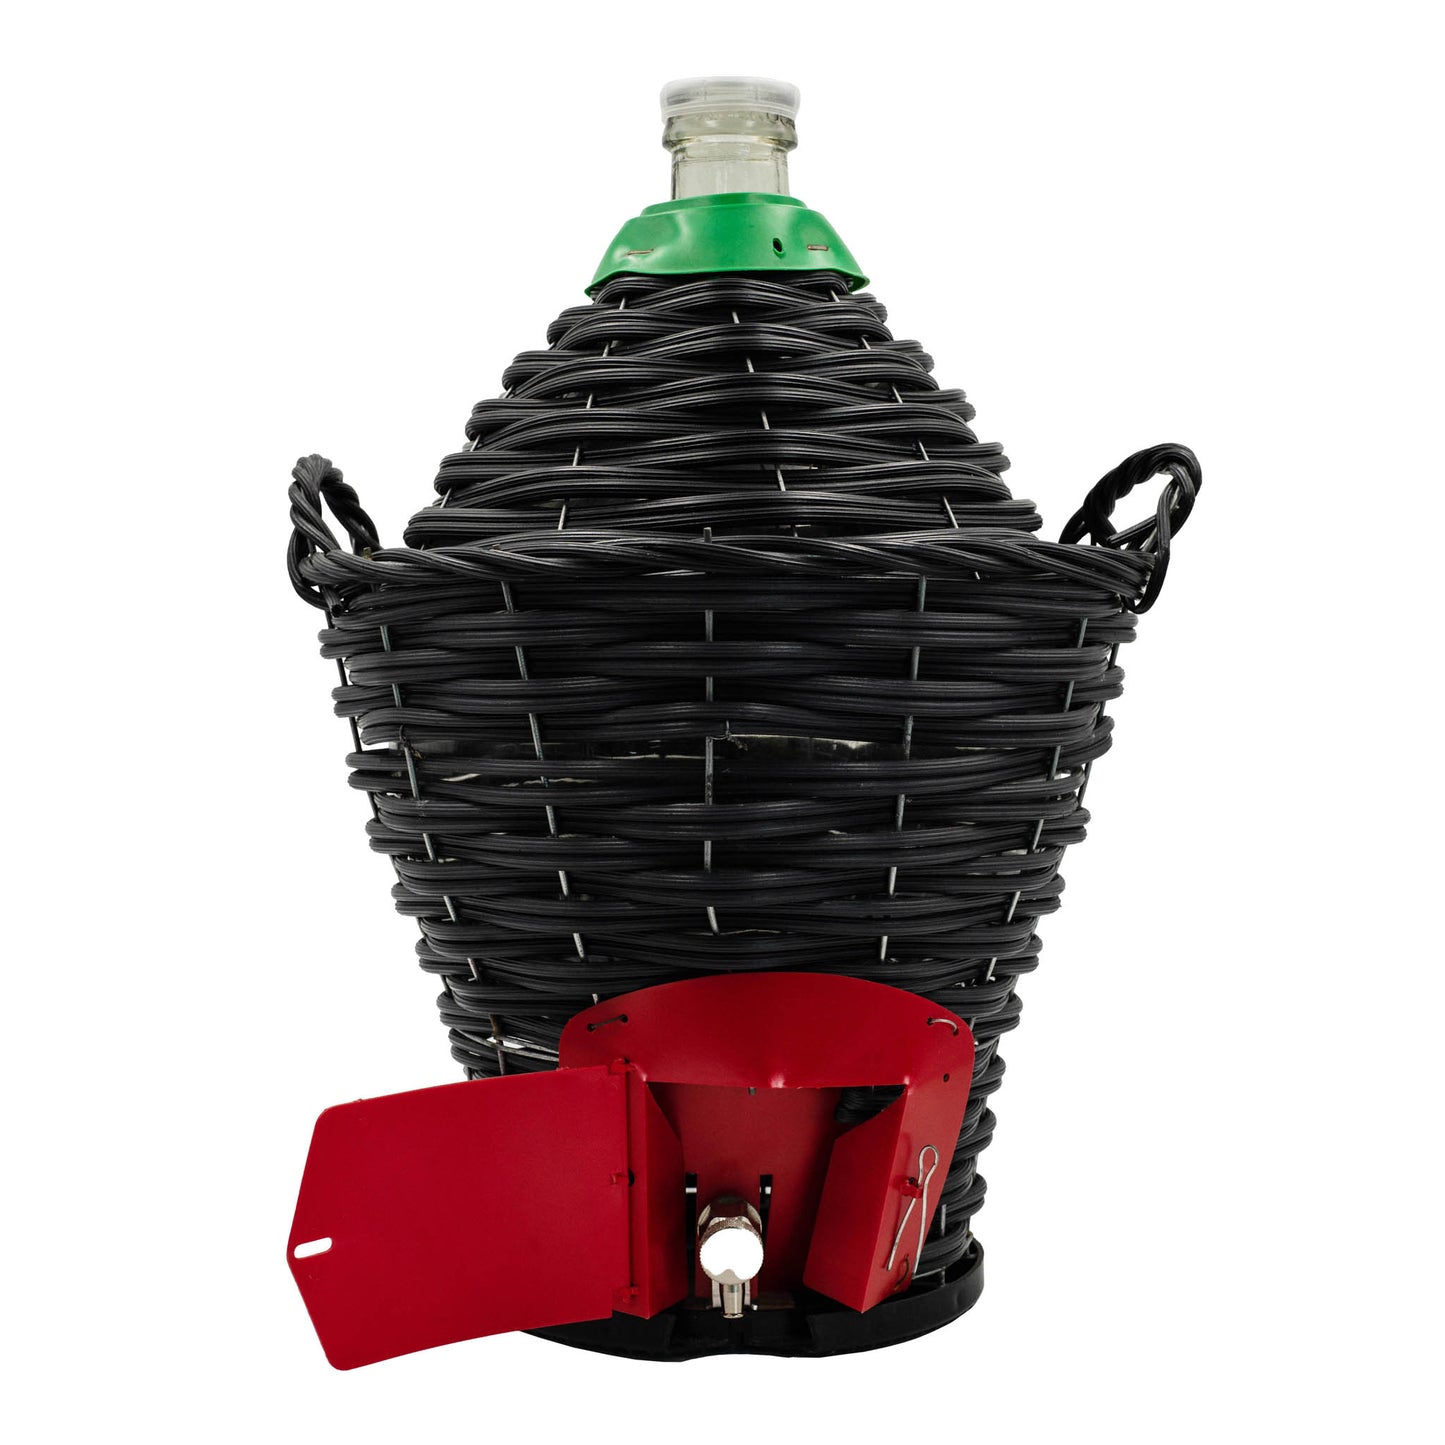 12 litre narrow neck demijohn with heavy weave basket and tap for storing and fermenting wine.